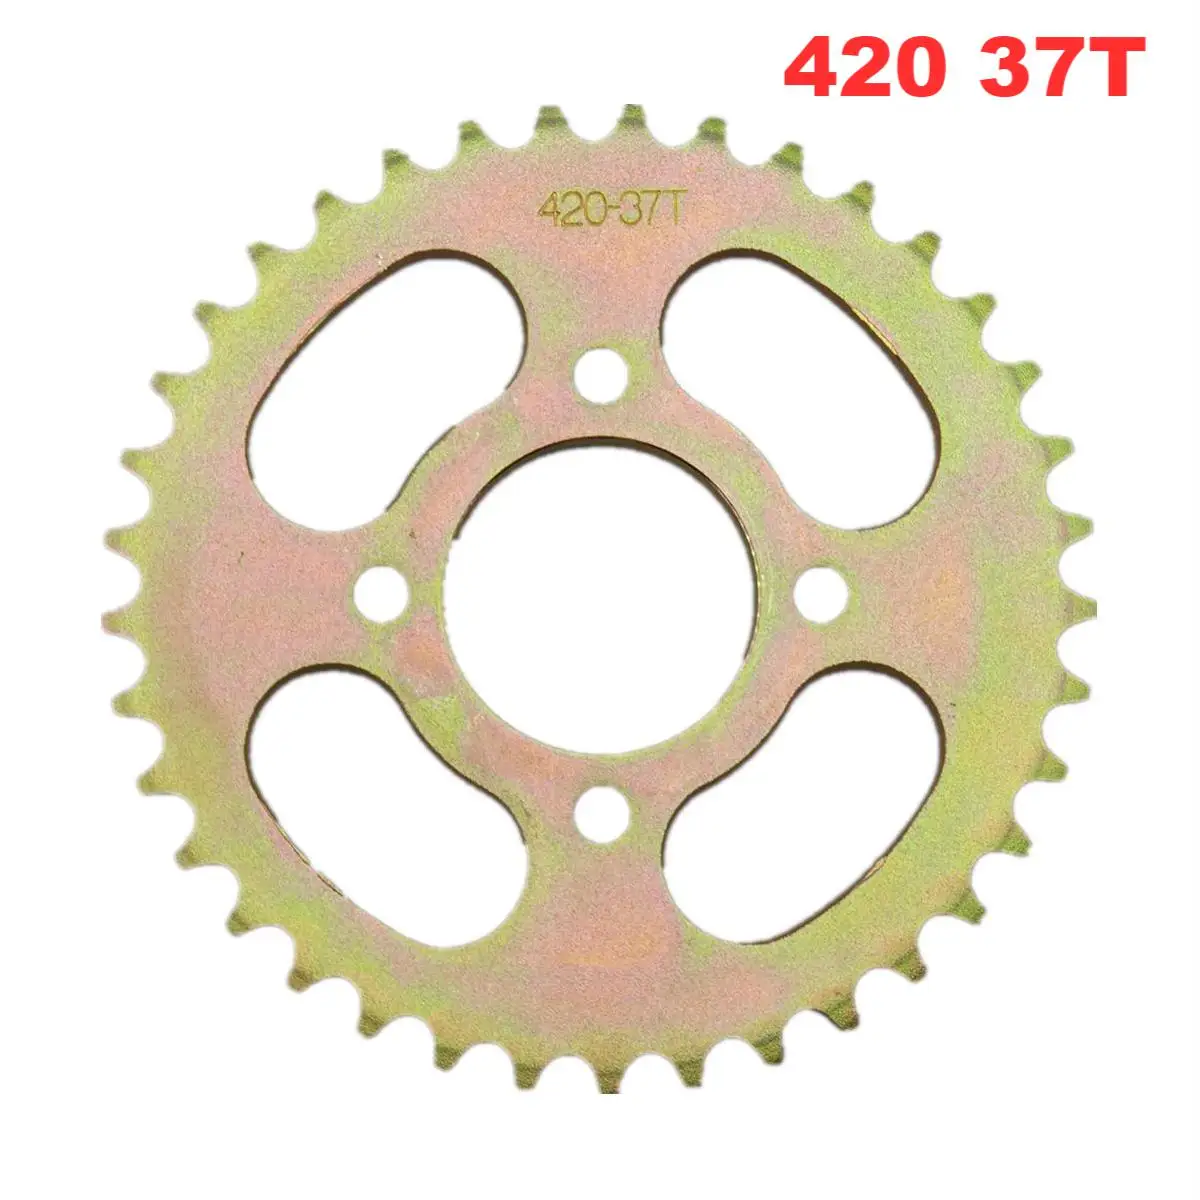 Gear Wheel Plate 420 37t Tooth 48mm Rear Chain Sprocket For Pit Dirt Bike 110-150cc karting ATV four-wheel off-road vehicle